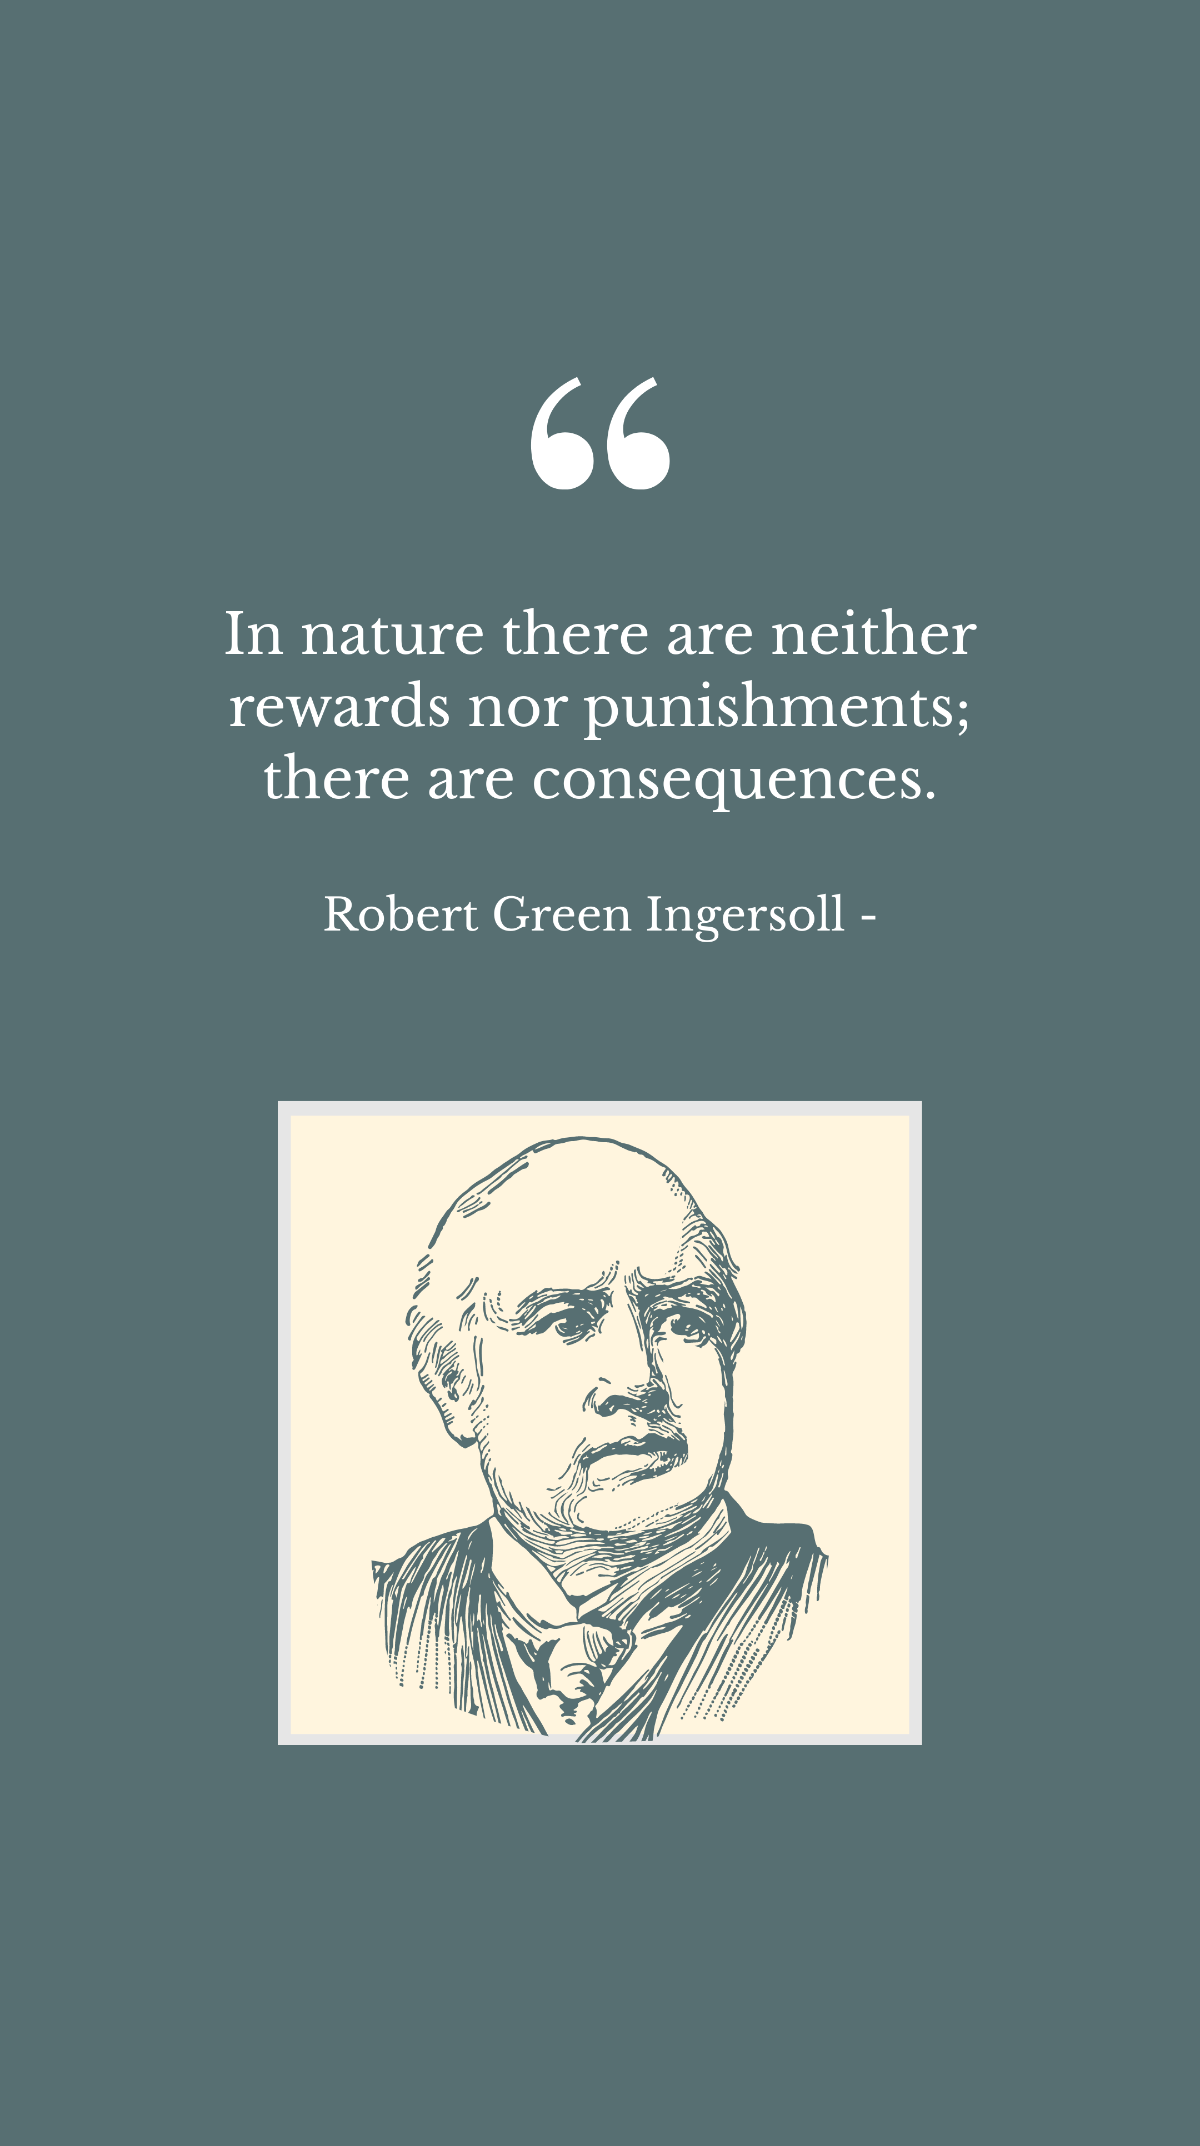 Free Robert Green Ingersoll - In nature there are neither rewards nor punishments; there are consequences. Template